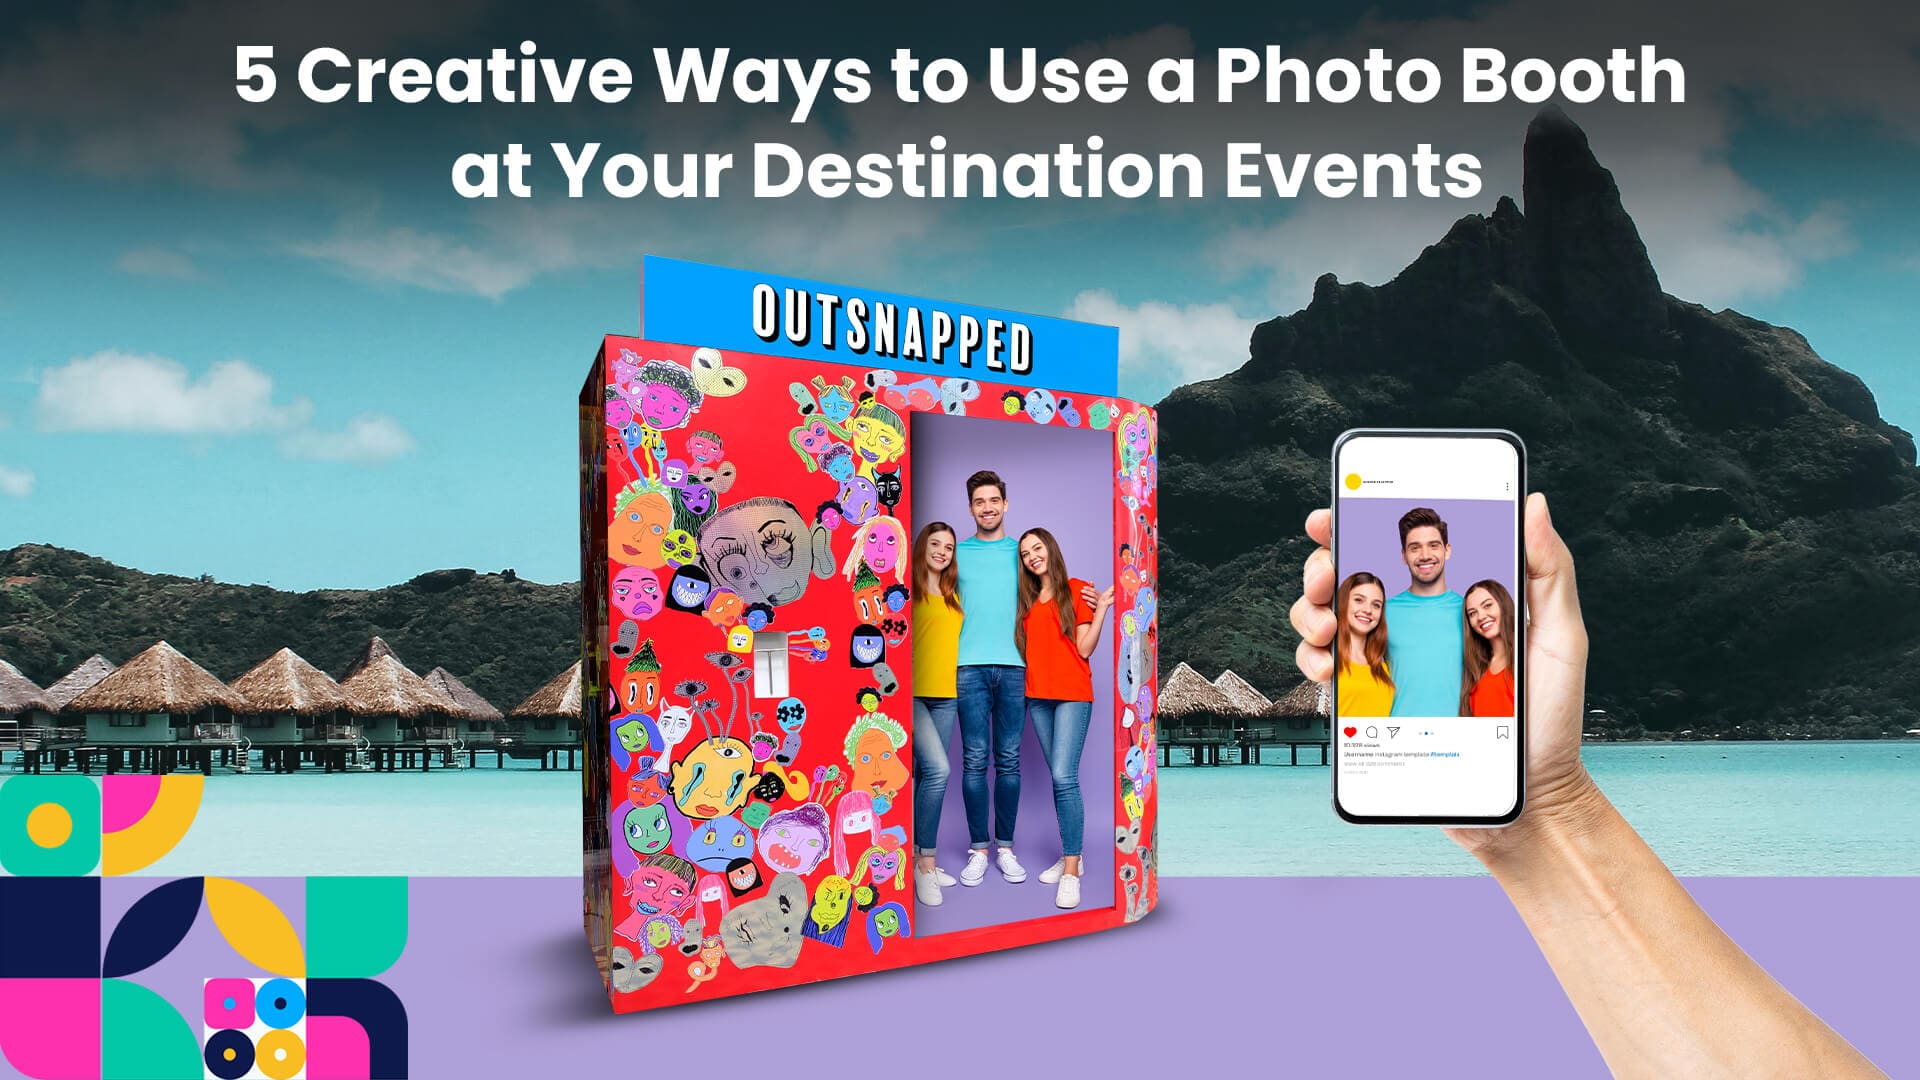 An image of a group of people smiling and taking a photo in a photo booth with a branded banner or backdrop. The background of the illustration could show a scenic destination location, such as a beach or mountain, to represent the idea of a destination event. In the foreground, one guest can be holding their phone and a photo from the booth can be shown as a post on a social media platform such as instagram or tiktok. The post can have the event's unique hashtag visible on it, to represent the idea of guests sharing their photos online.